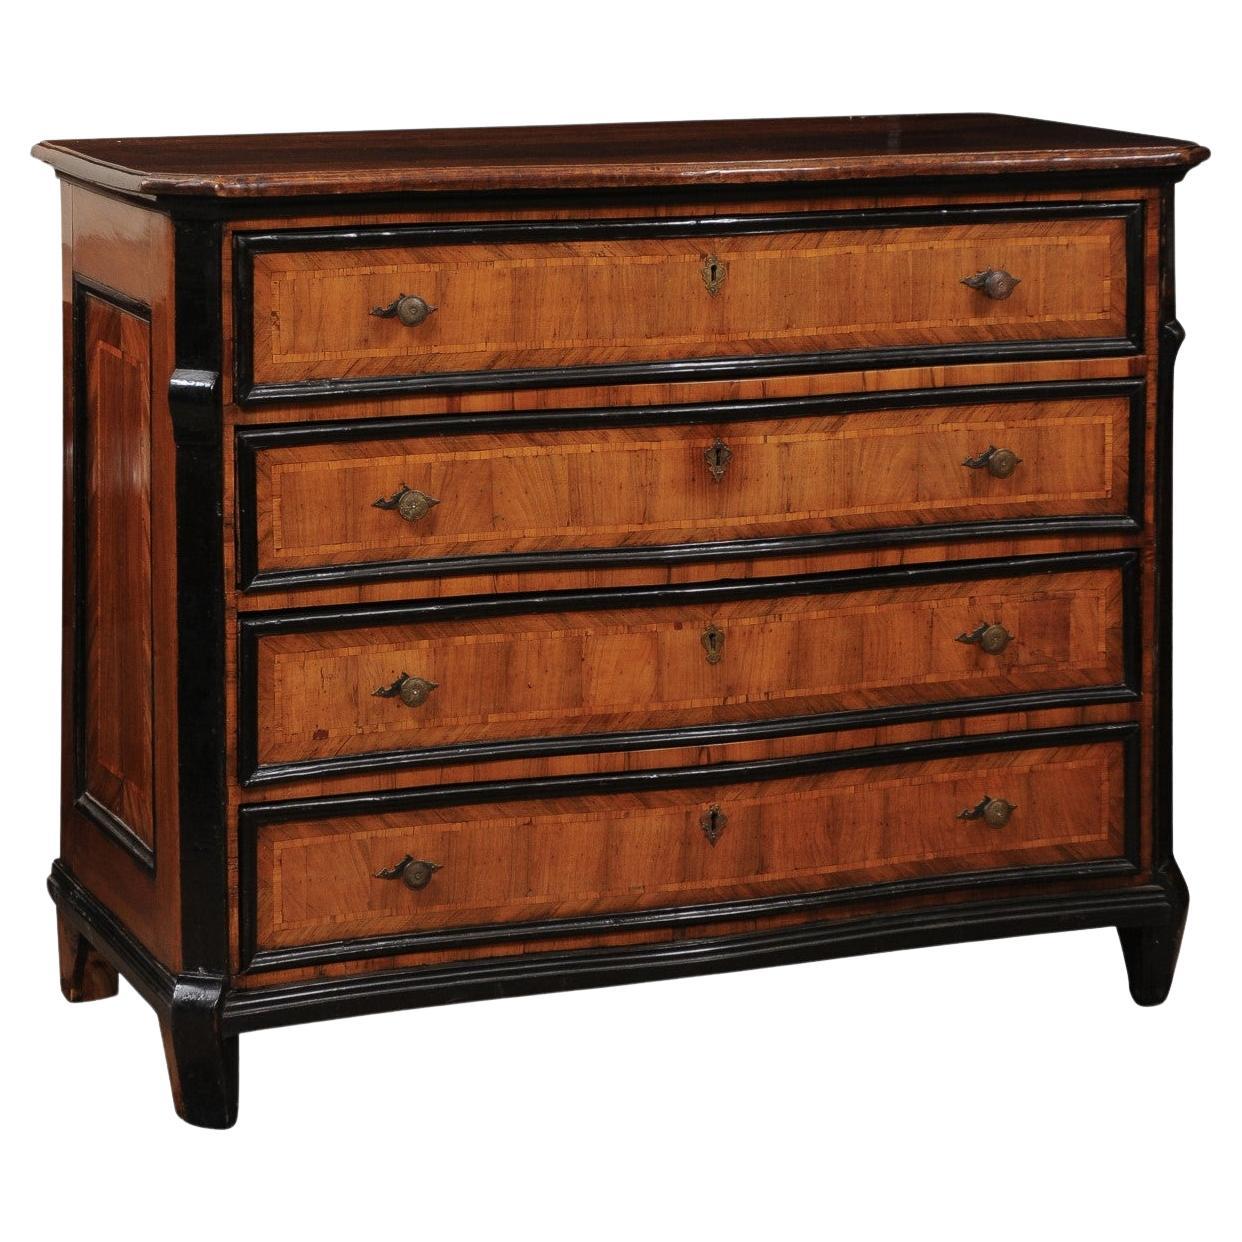 Large Early 18th Century Italian Canterano Walnut Inlaid Commode with 4 Drawers  For Sale